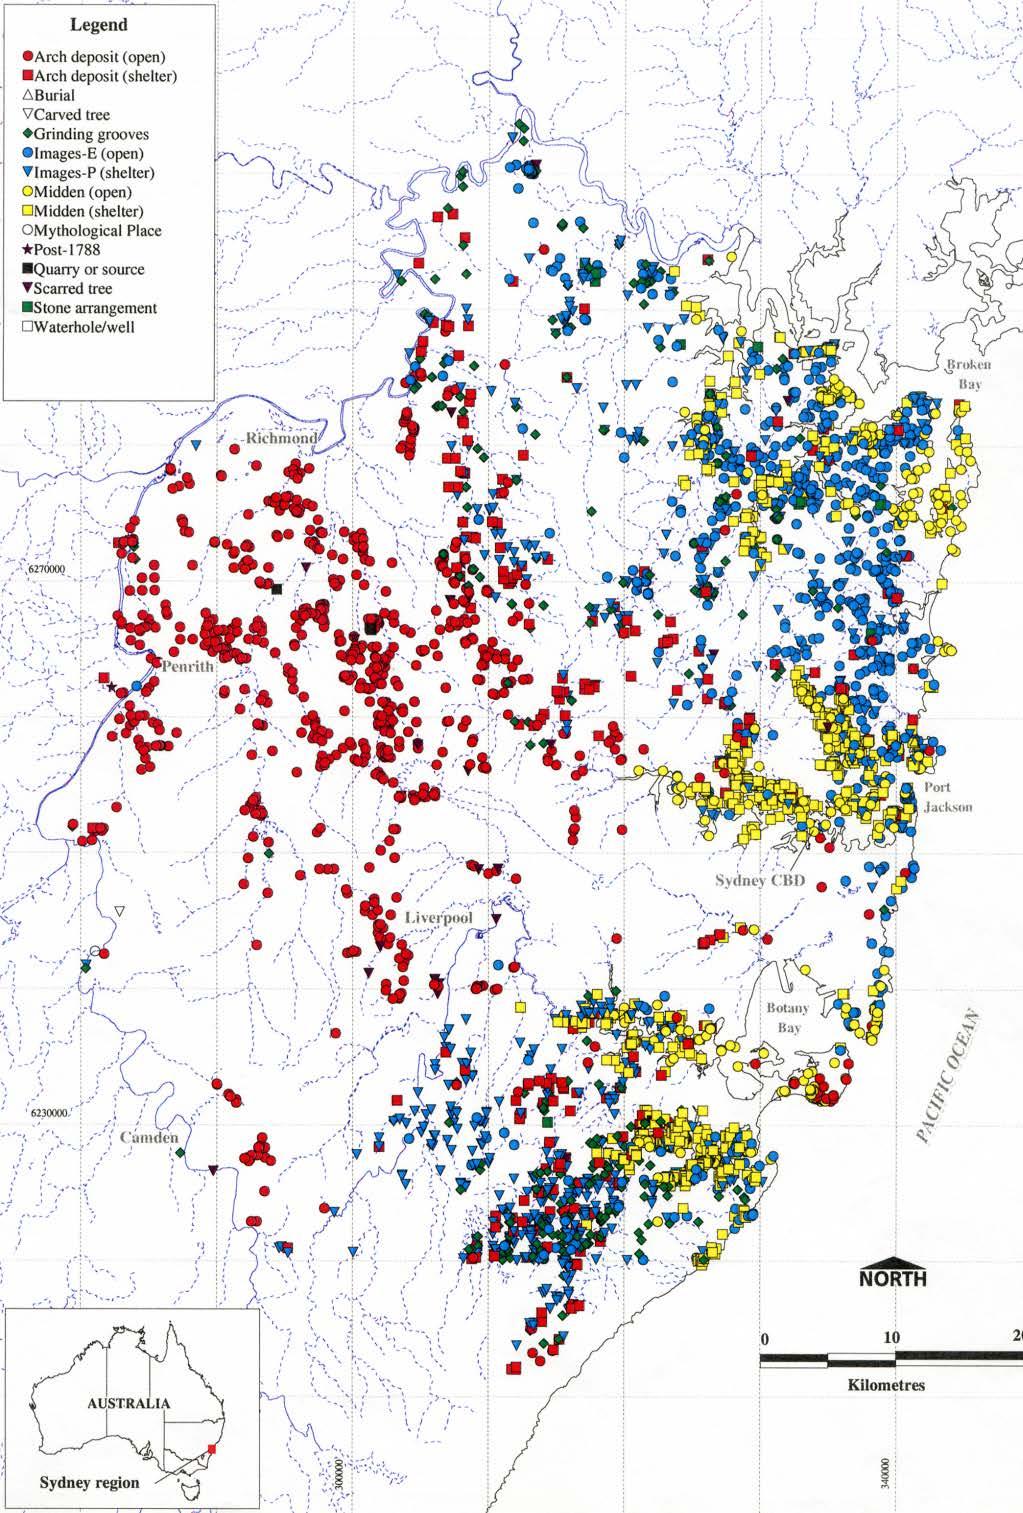 ARCHAEOLOGICAL SITES DISTRIBUTION OF ABORIGINAL SITES IN THE SYDNEY REGION, 2002